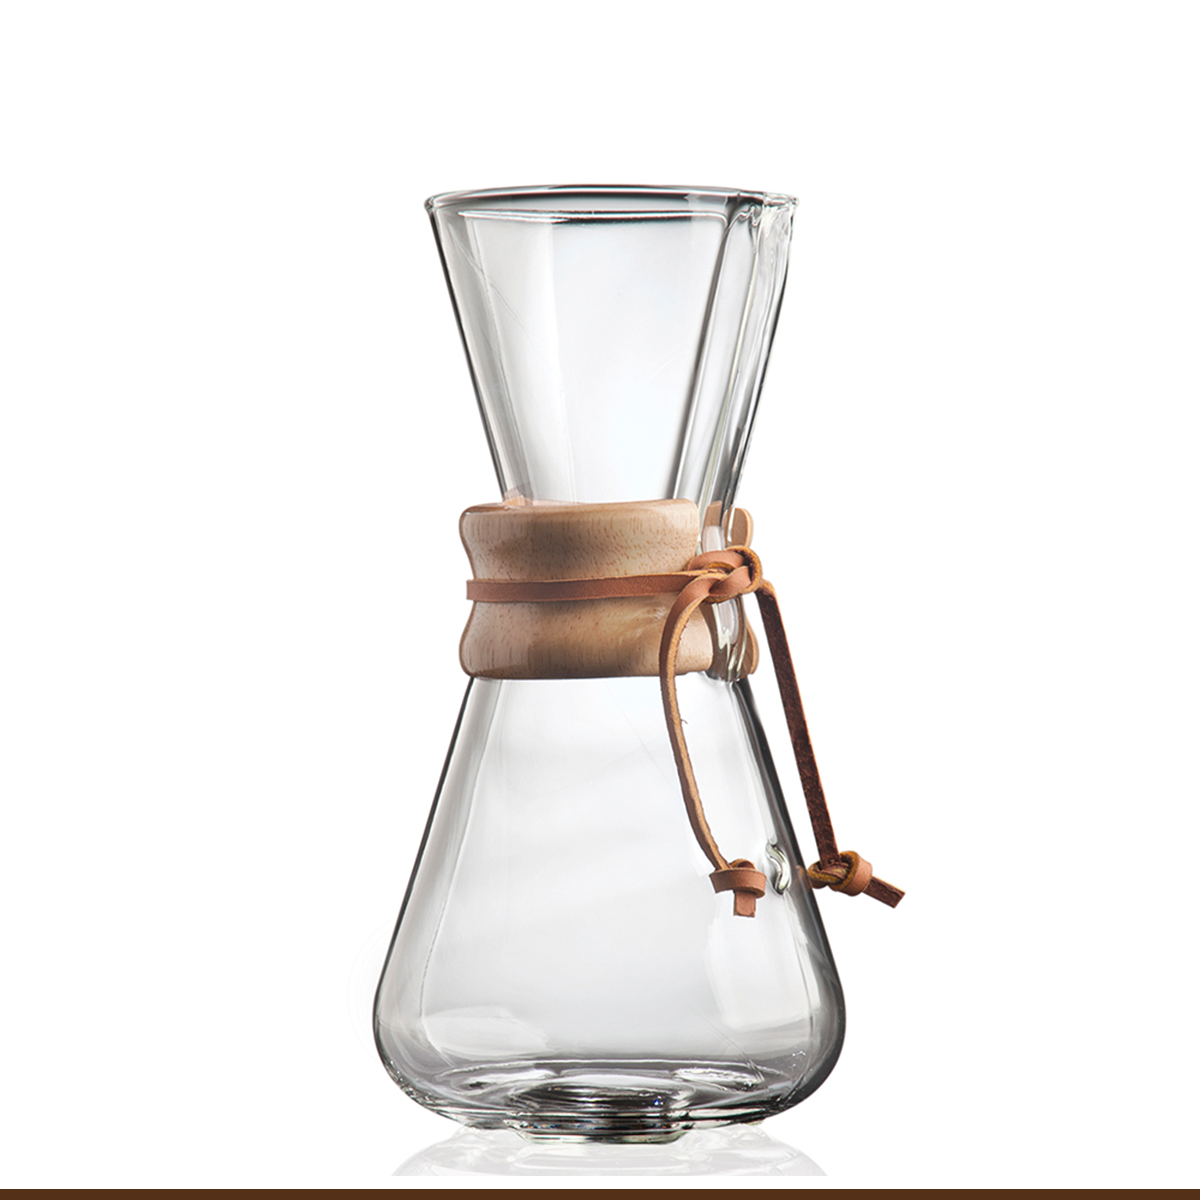 https://store.chemexcoffeemaker.com/media/catalog/product/c/h/chemex-classic-3cup-detail_1.png